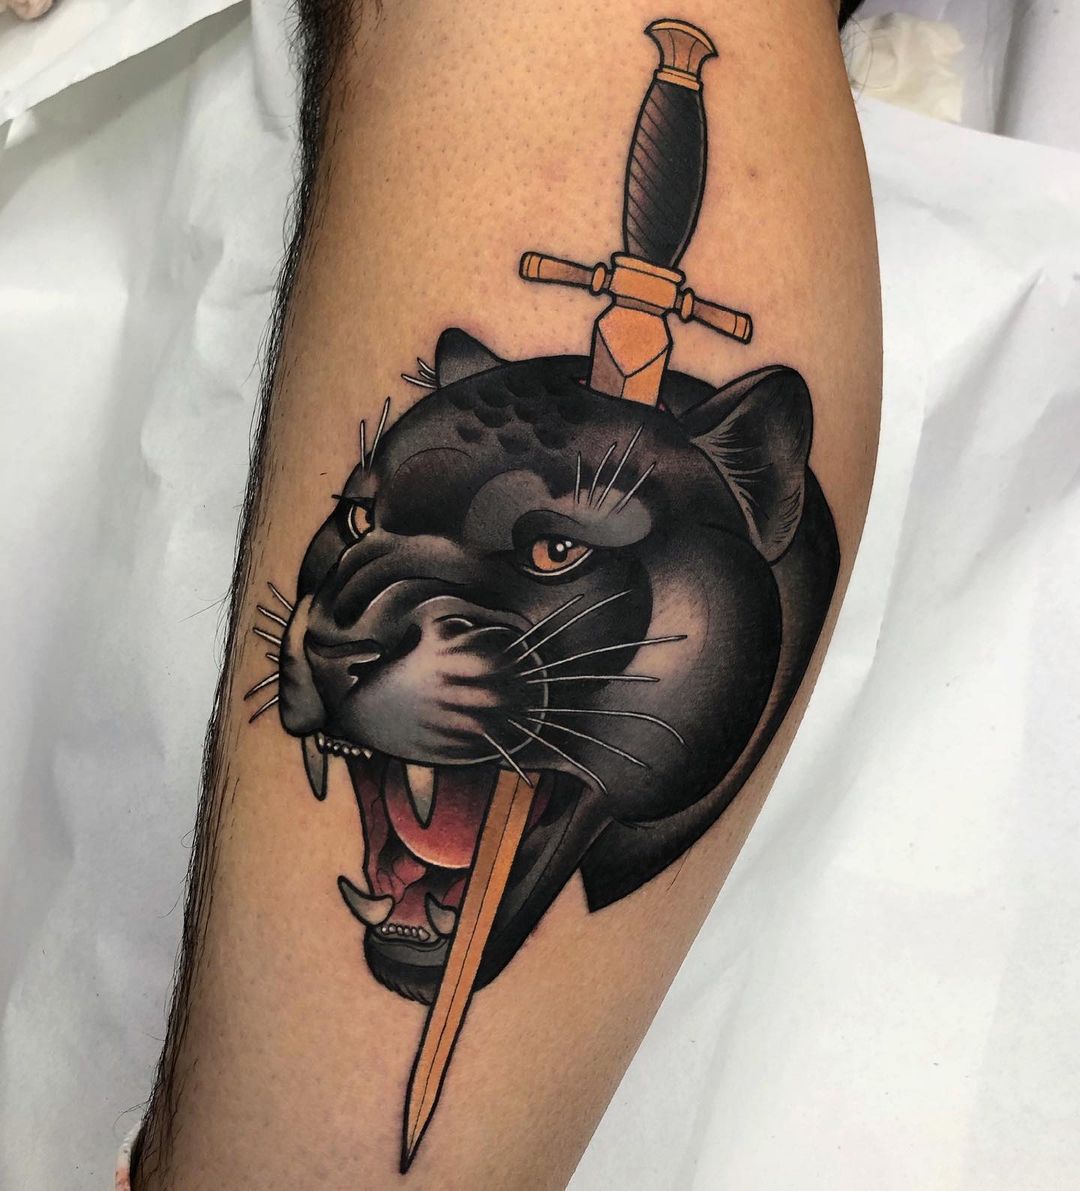 8392 Panther Head Tattoo Images Stock Photos  Vectors  Shutterstock